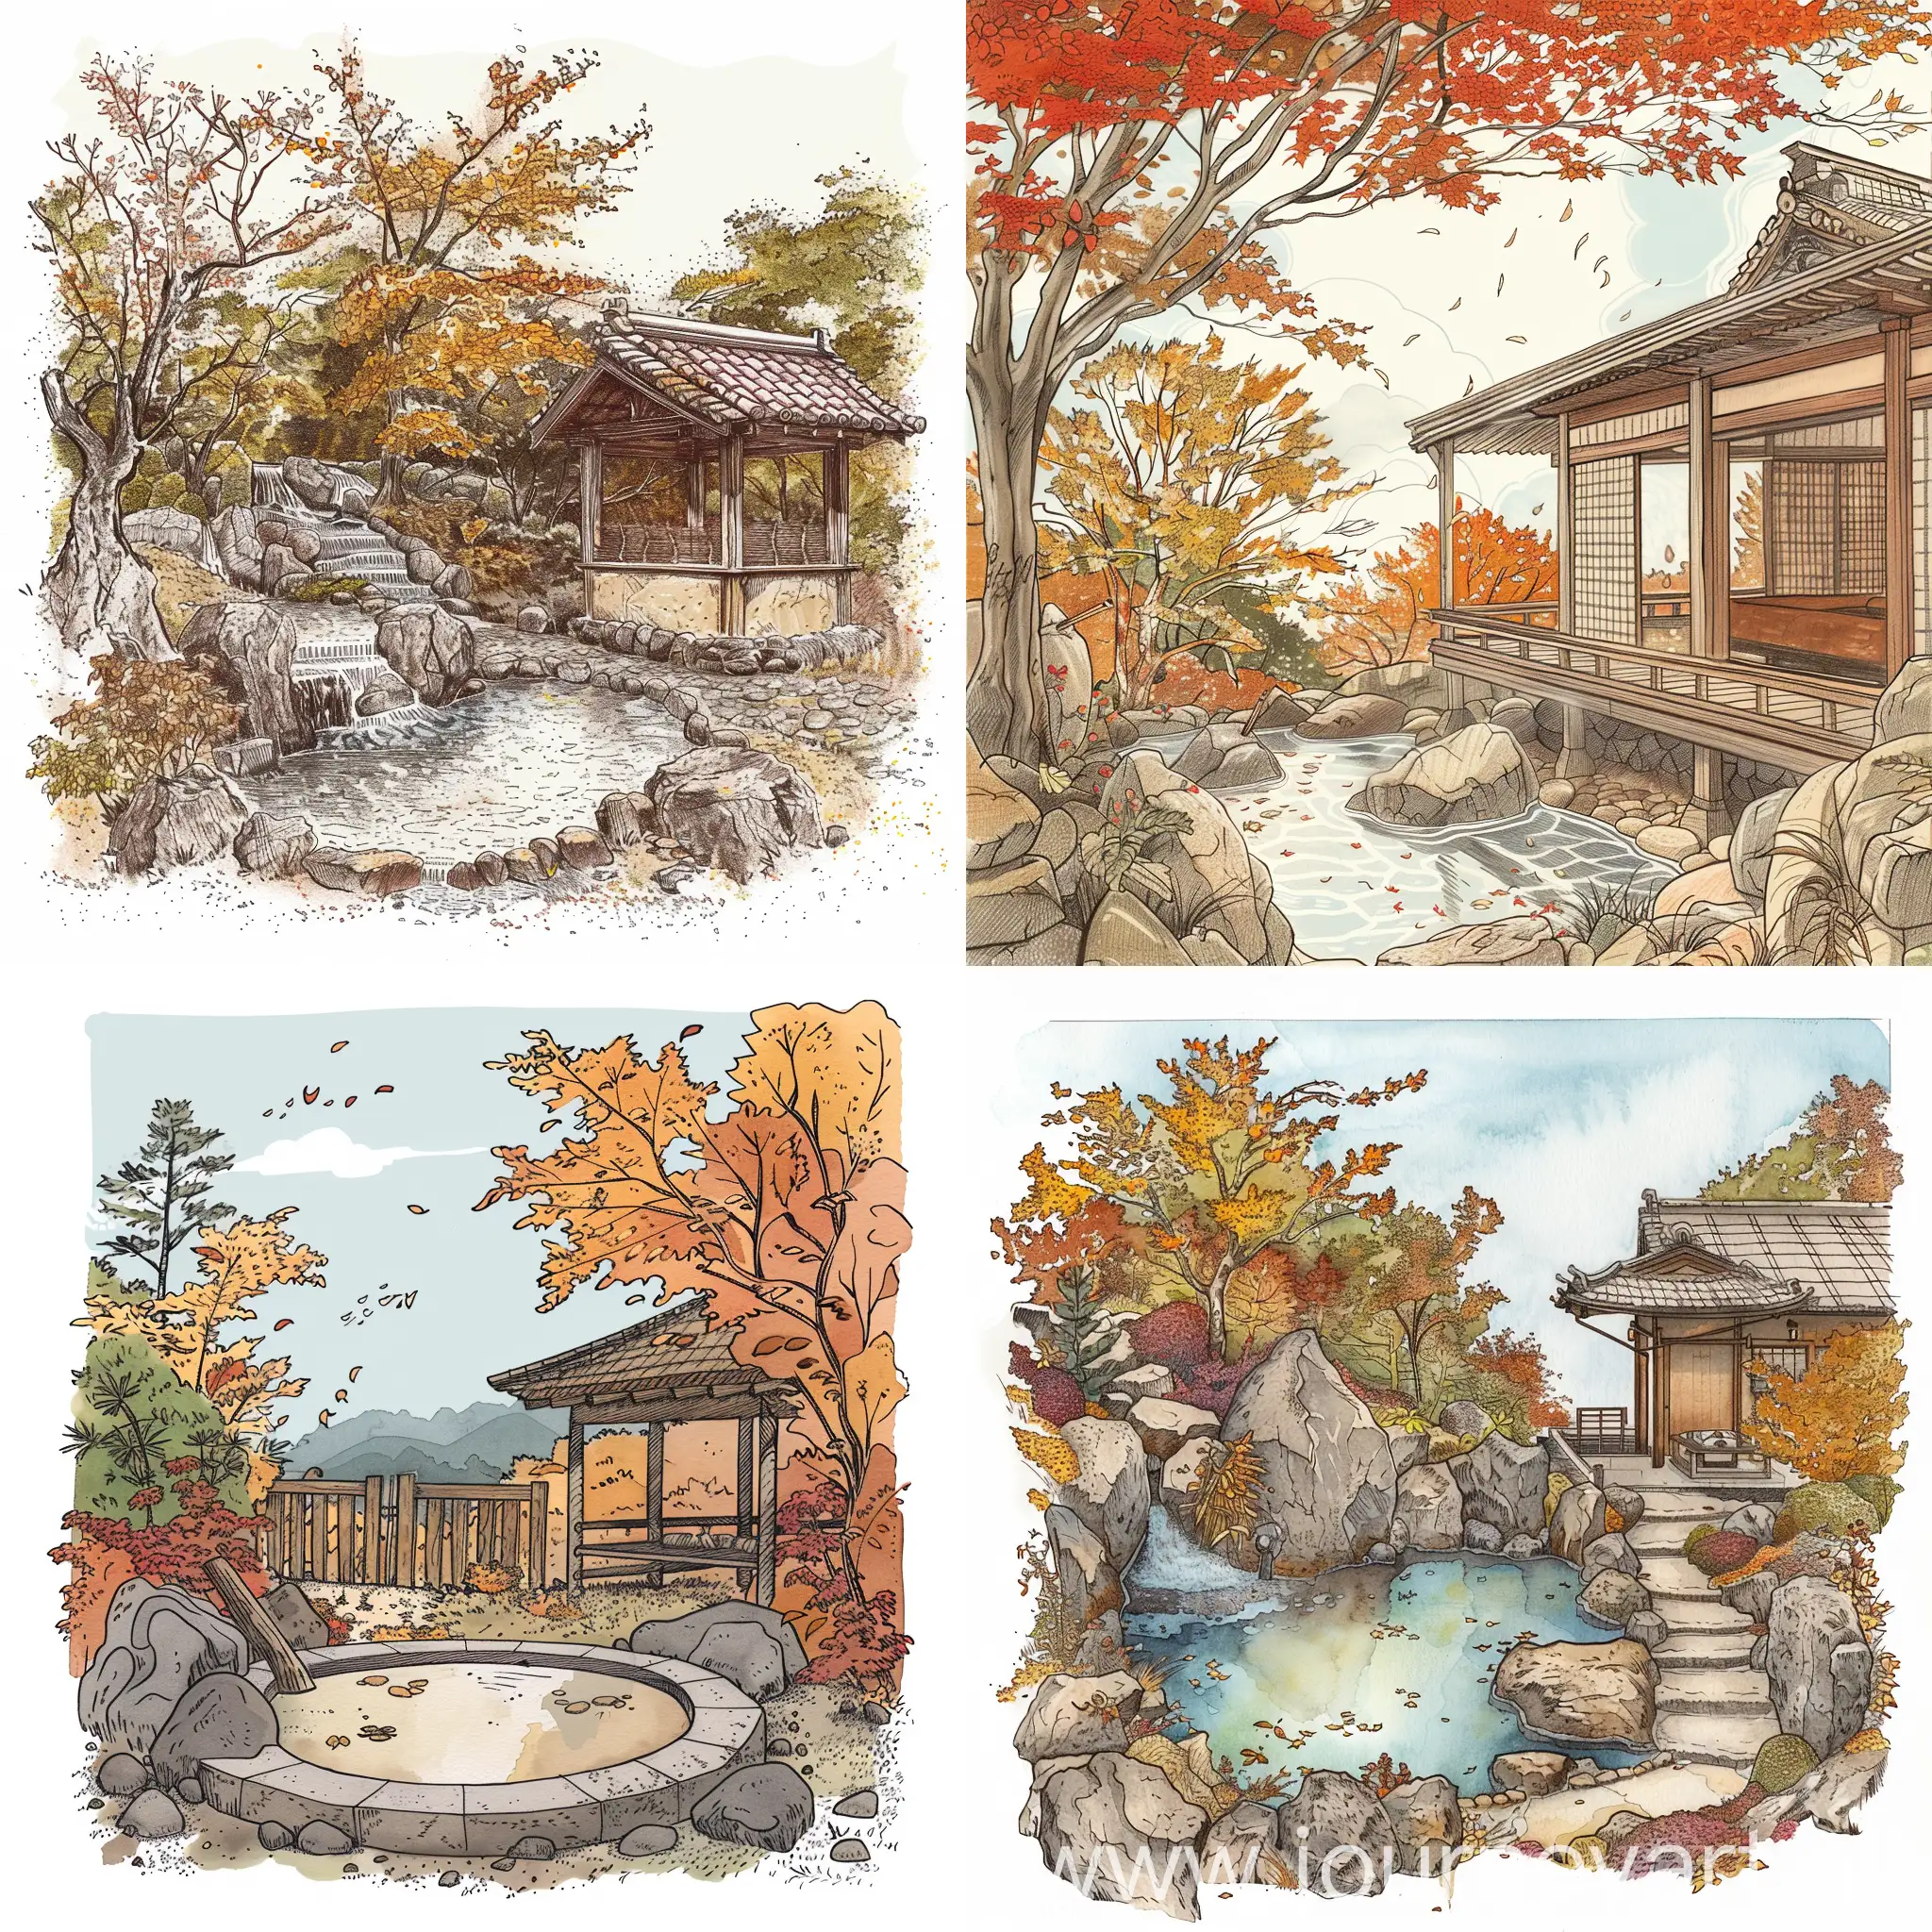 a drawing of a traditional open air onsen in nature in autumn